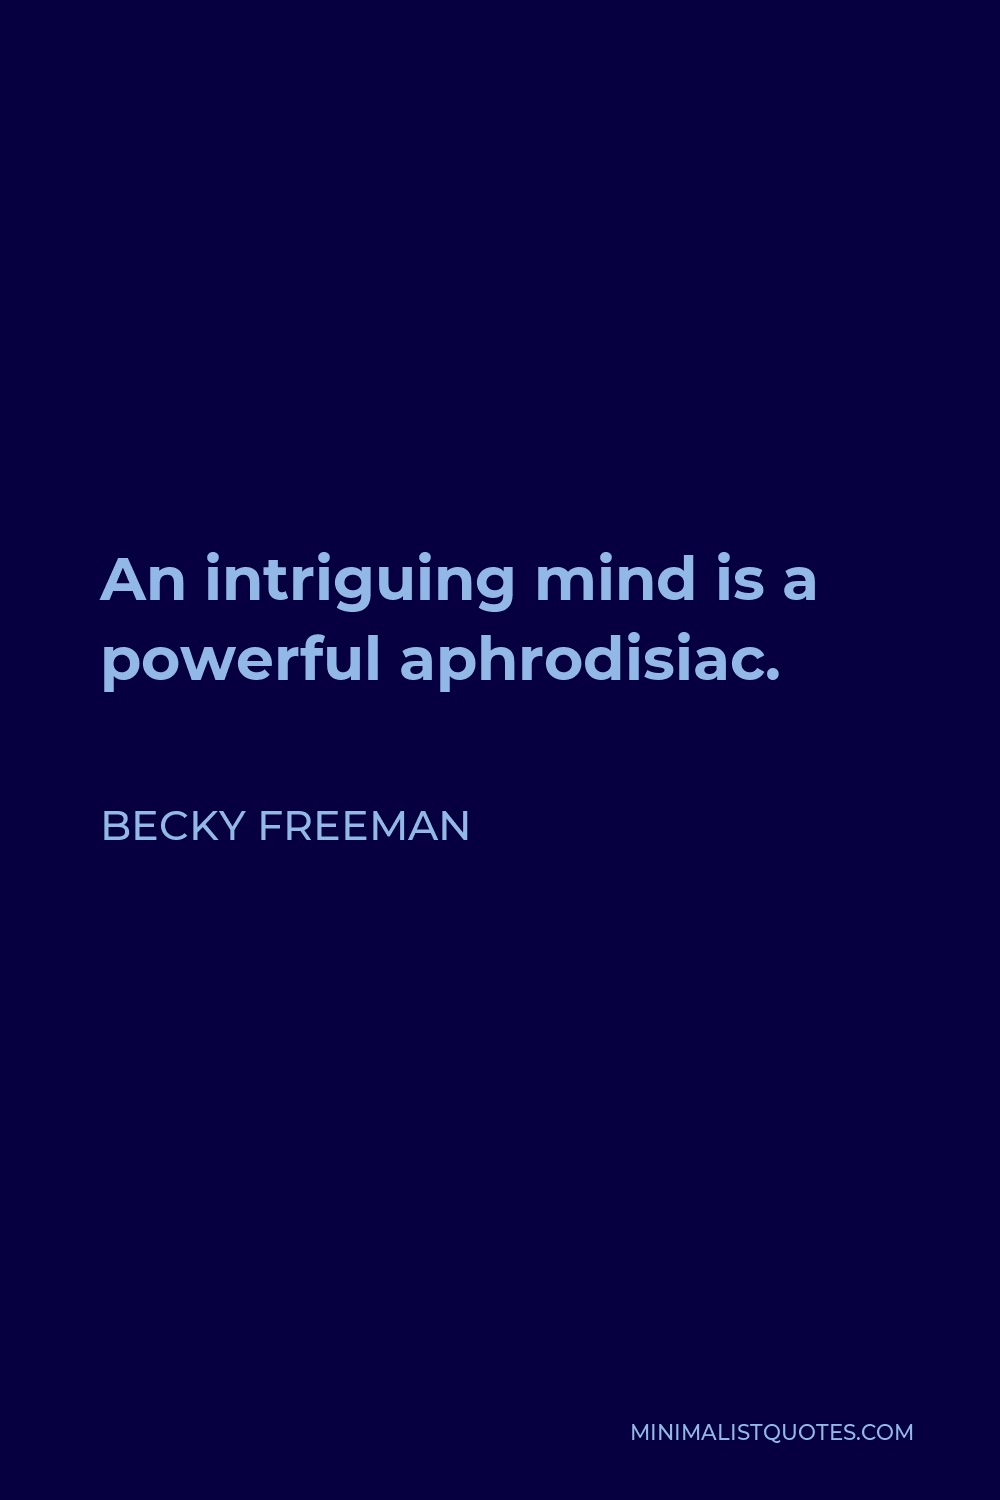 Becky Freeman Quote - An intriguing mind is a powerful aphrodisiac.